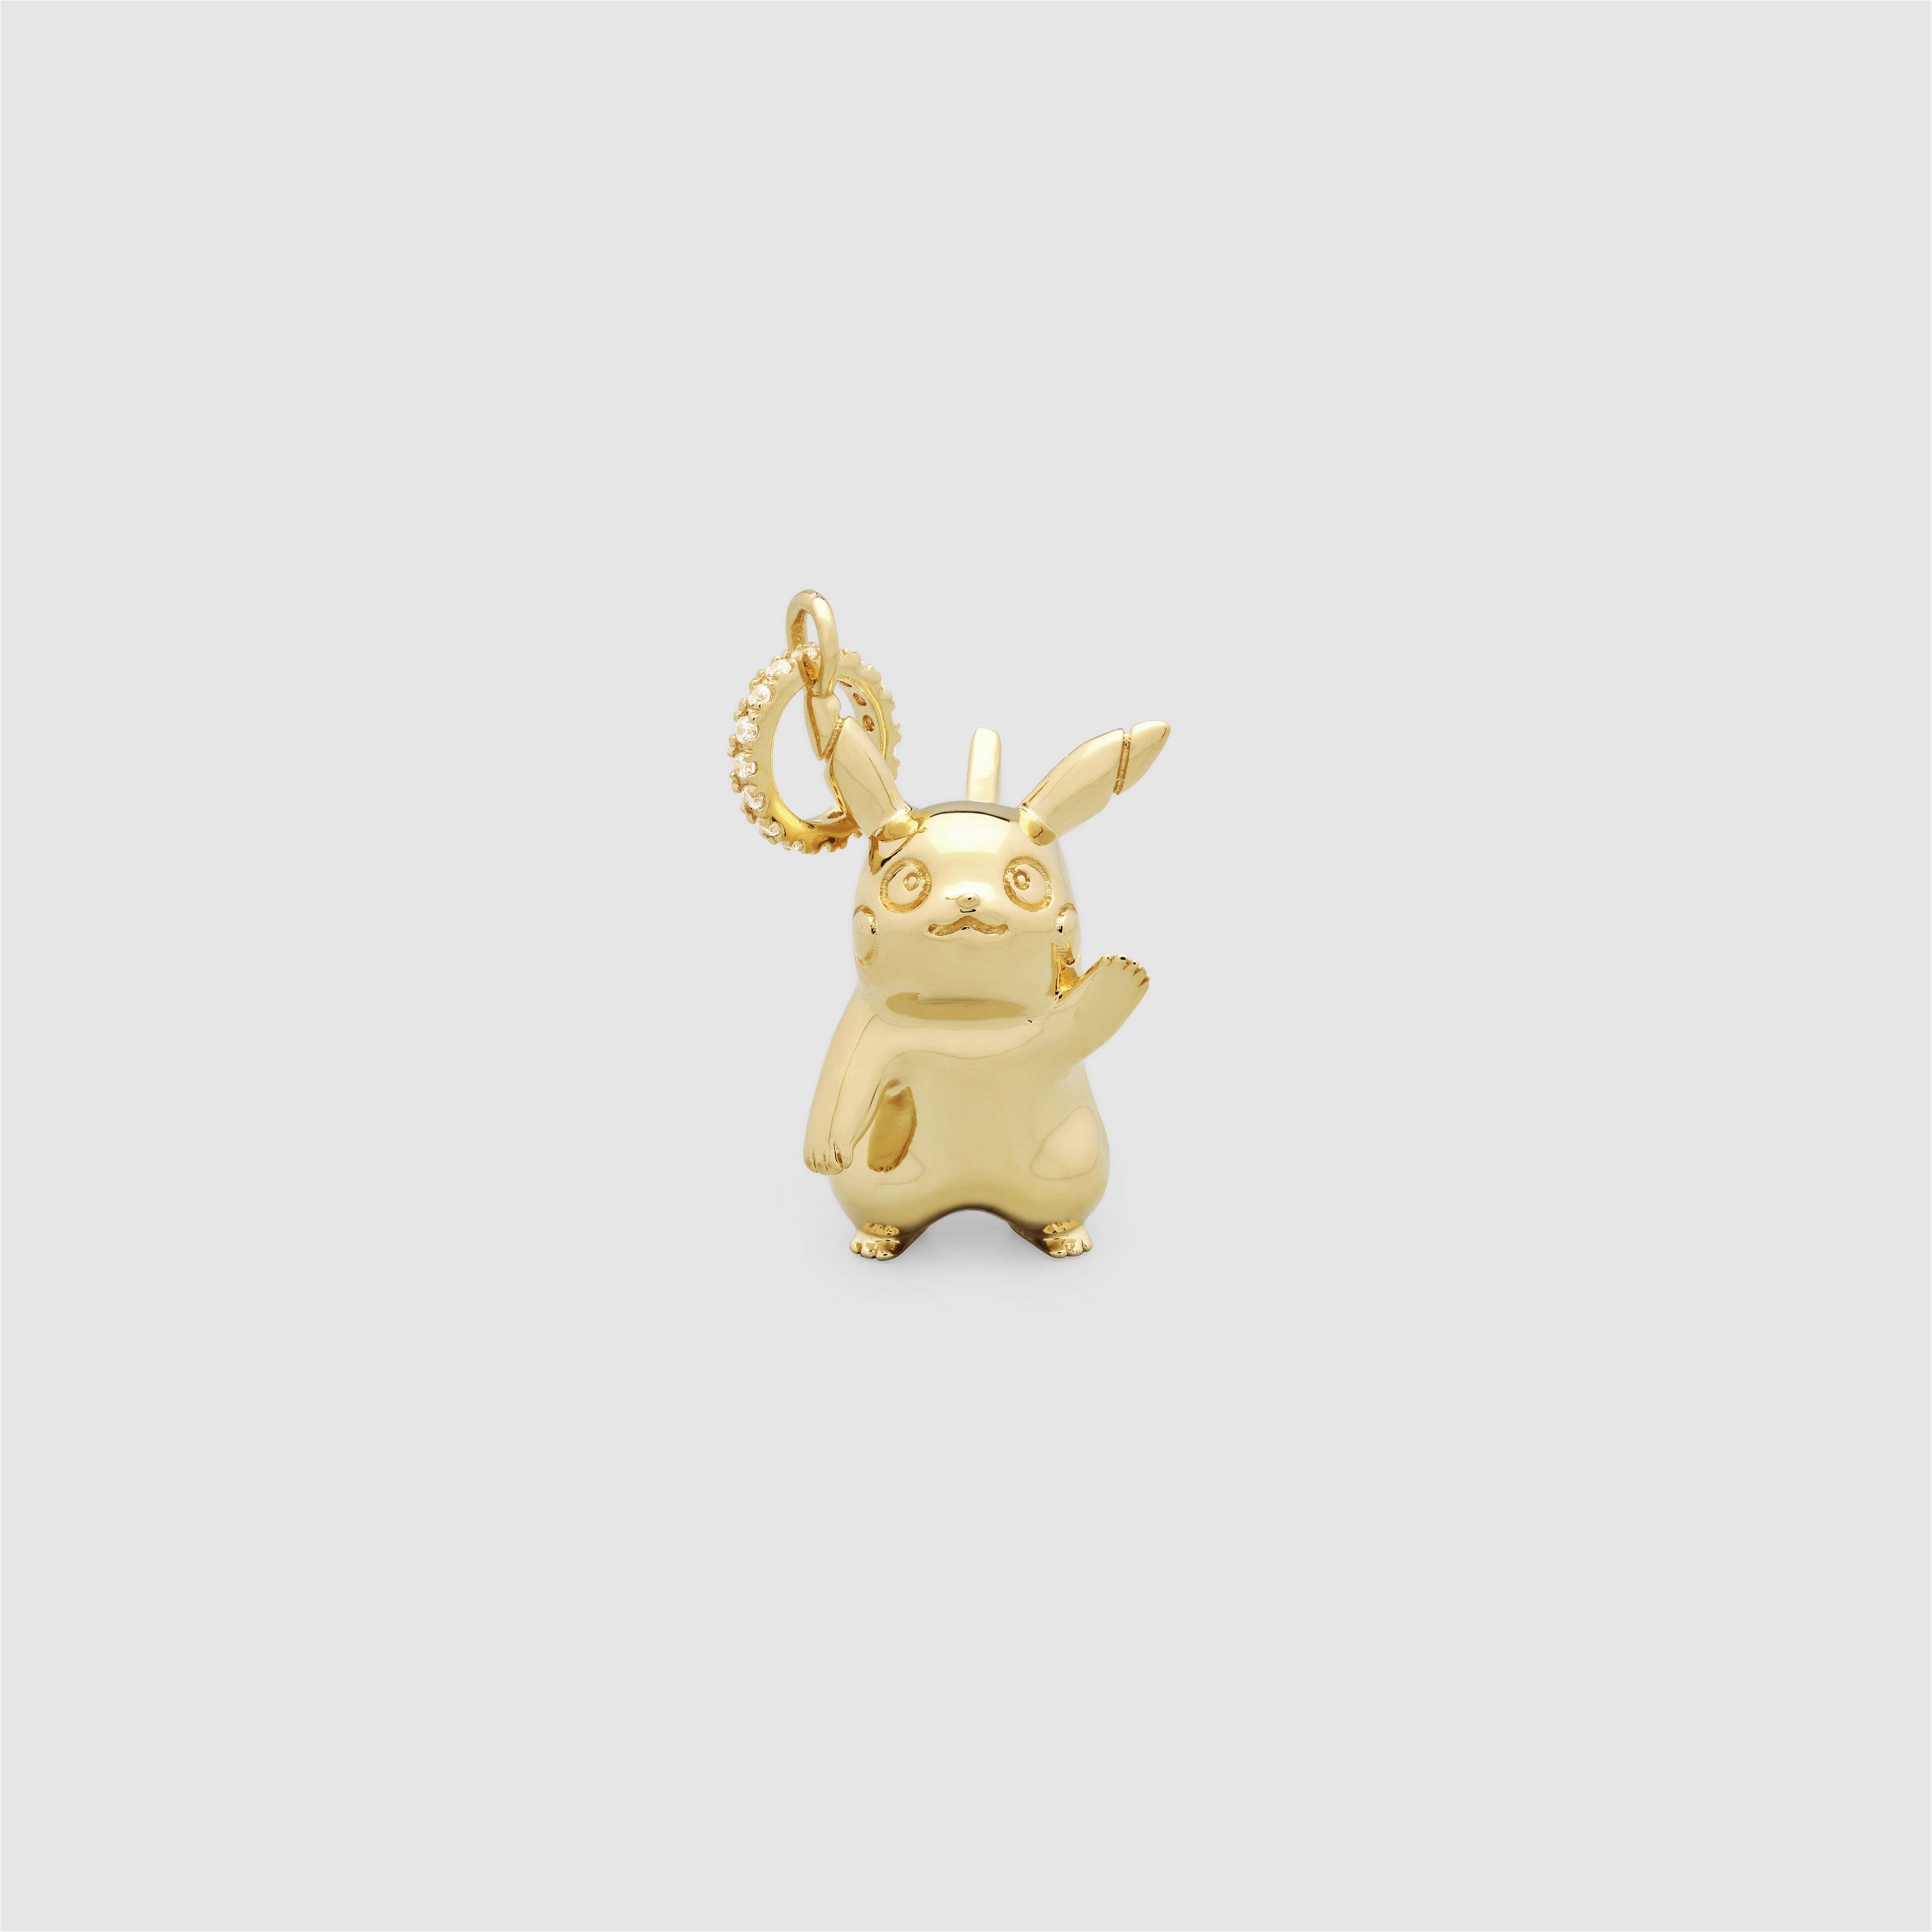 TOM WOOD - Pikachu Hello Gold Charm - (Yellow Gold) by TOM WOOD